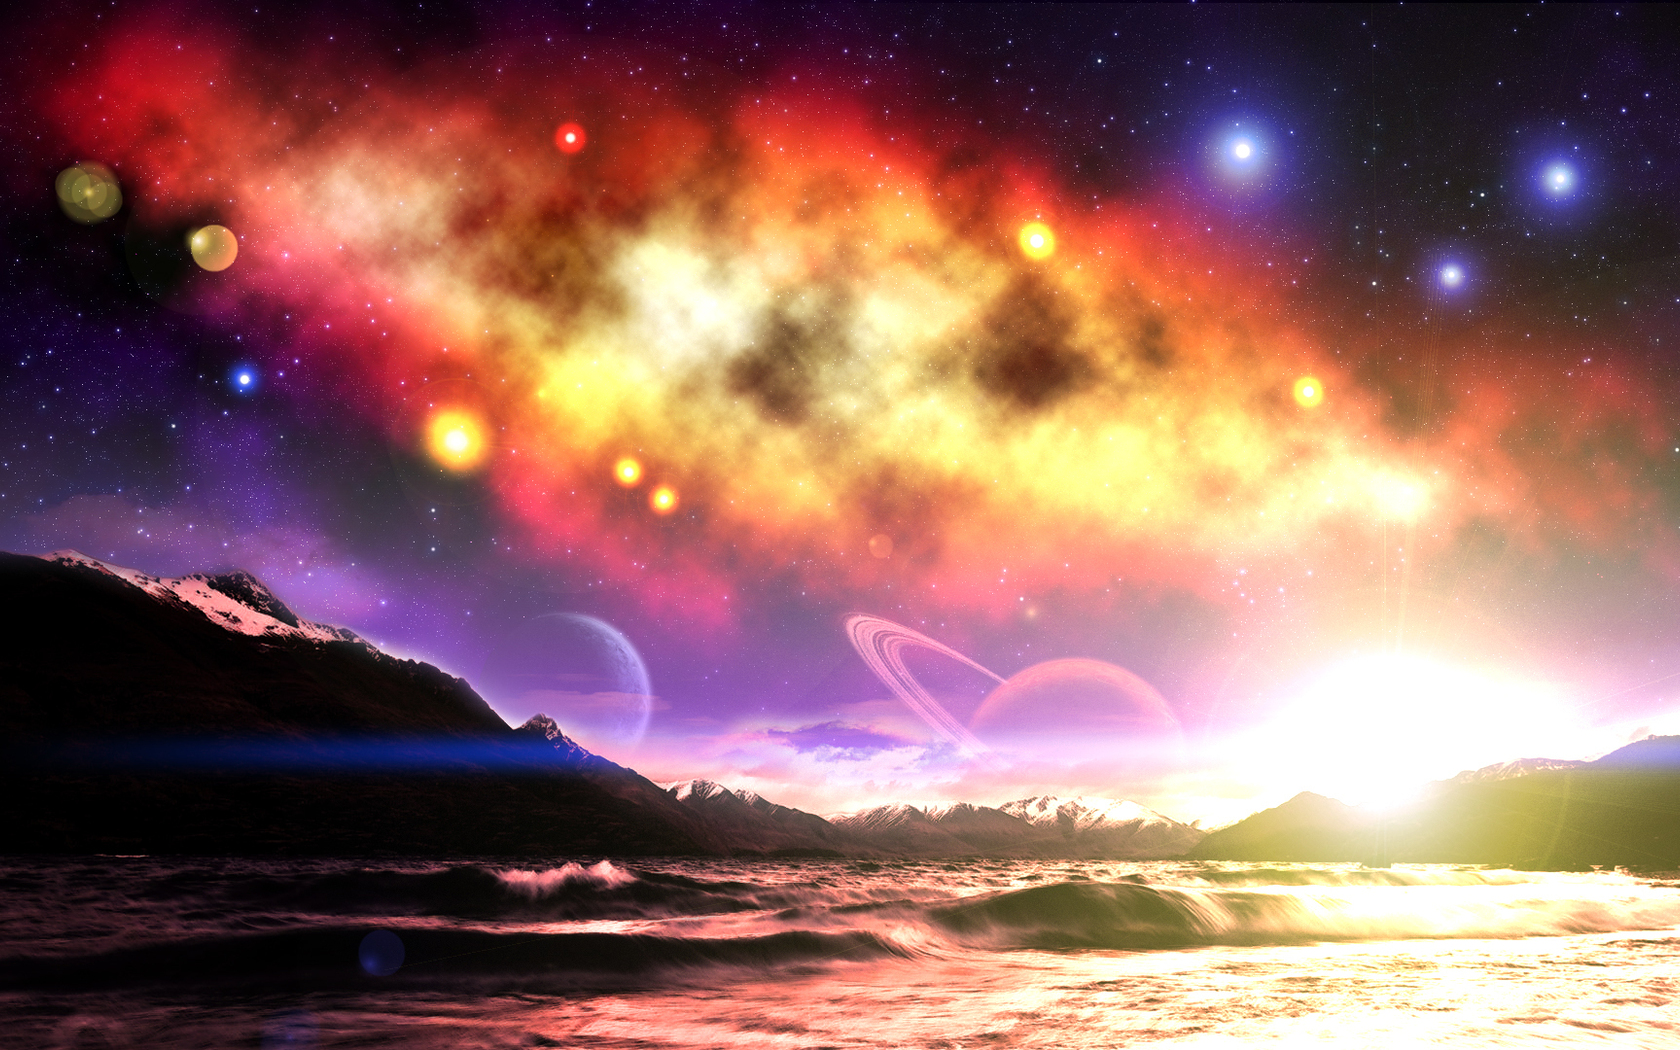 space, star, psychedelic, artistic, trippy, mountain, planet, sky, fantasy, sci fi Full HD